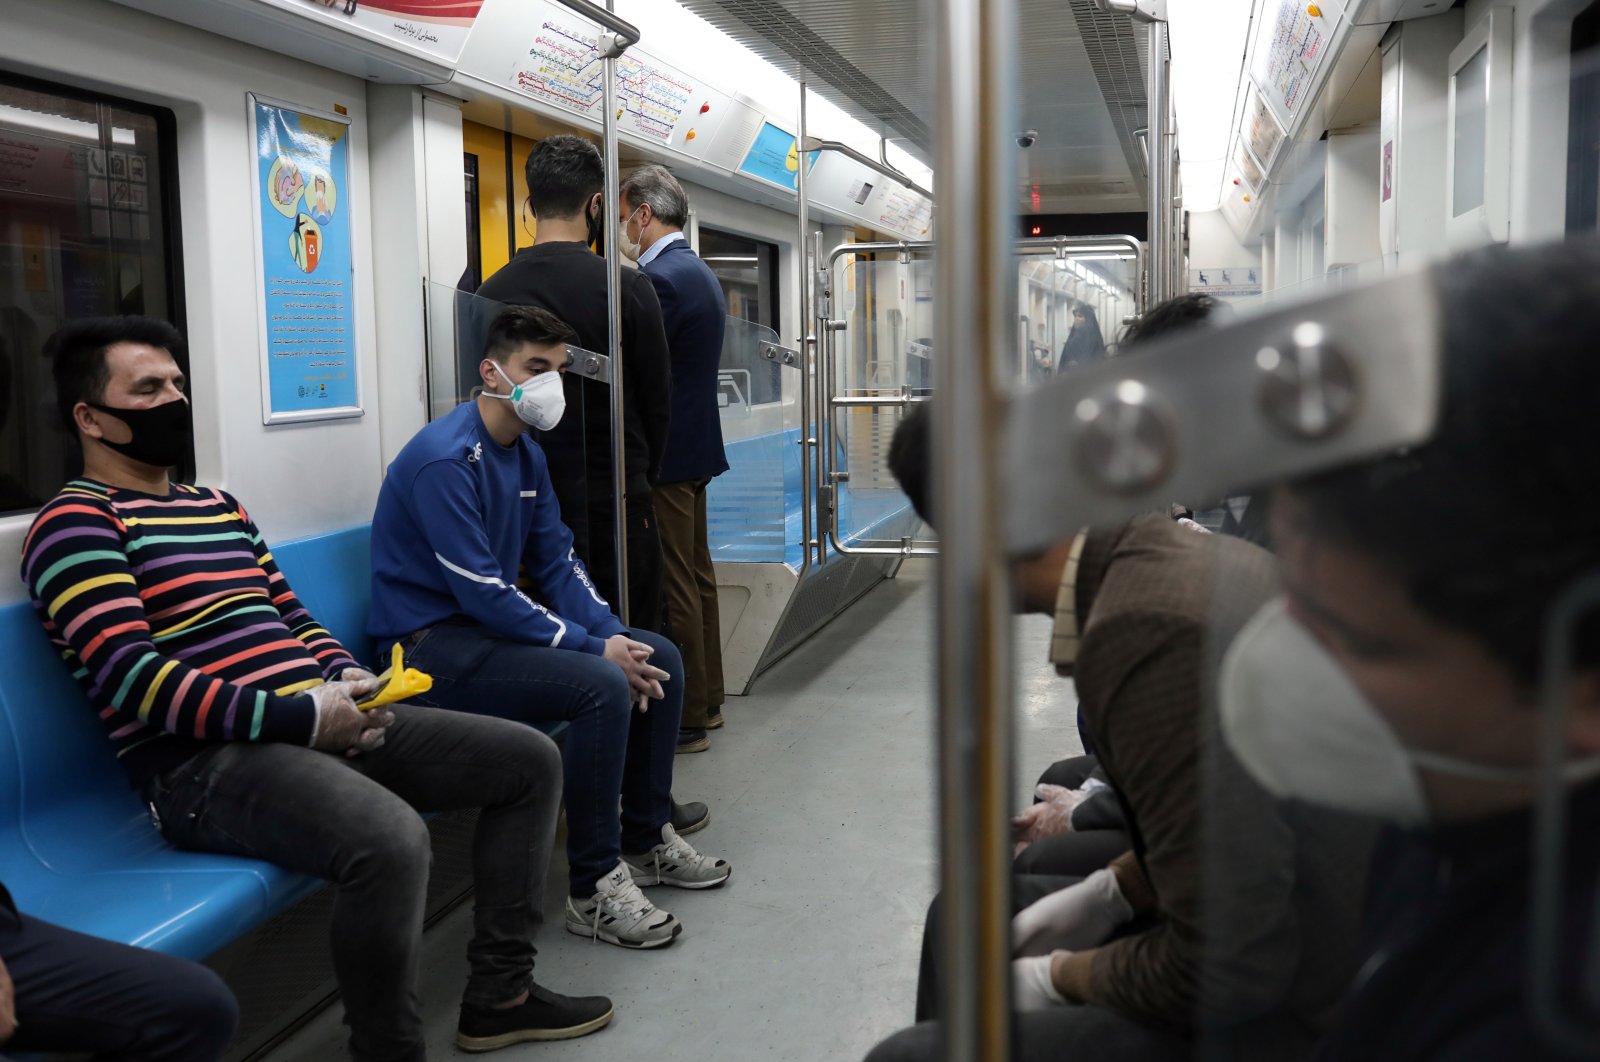 People wear protective face masks as they sit in a subway car in Tehran, Tuesday, March 17, 2020. (Reuters Photo)